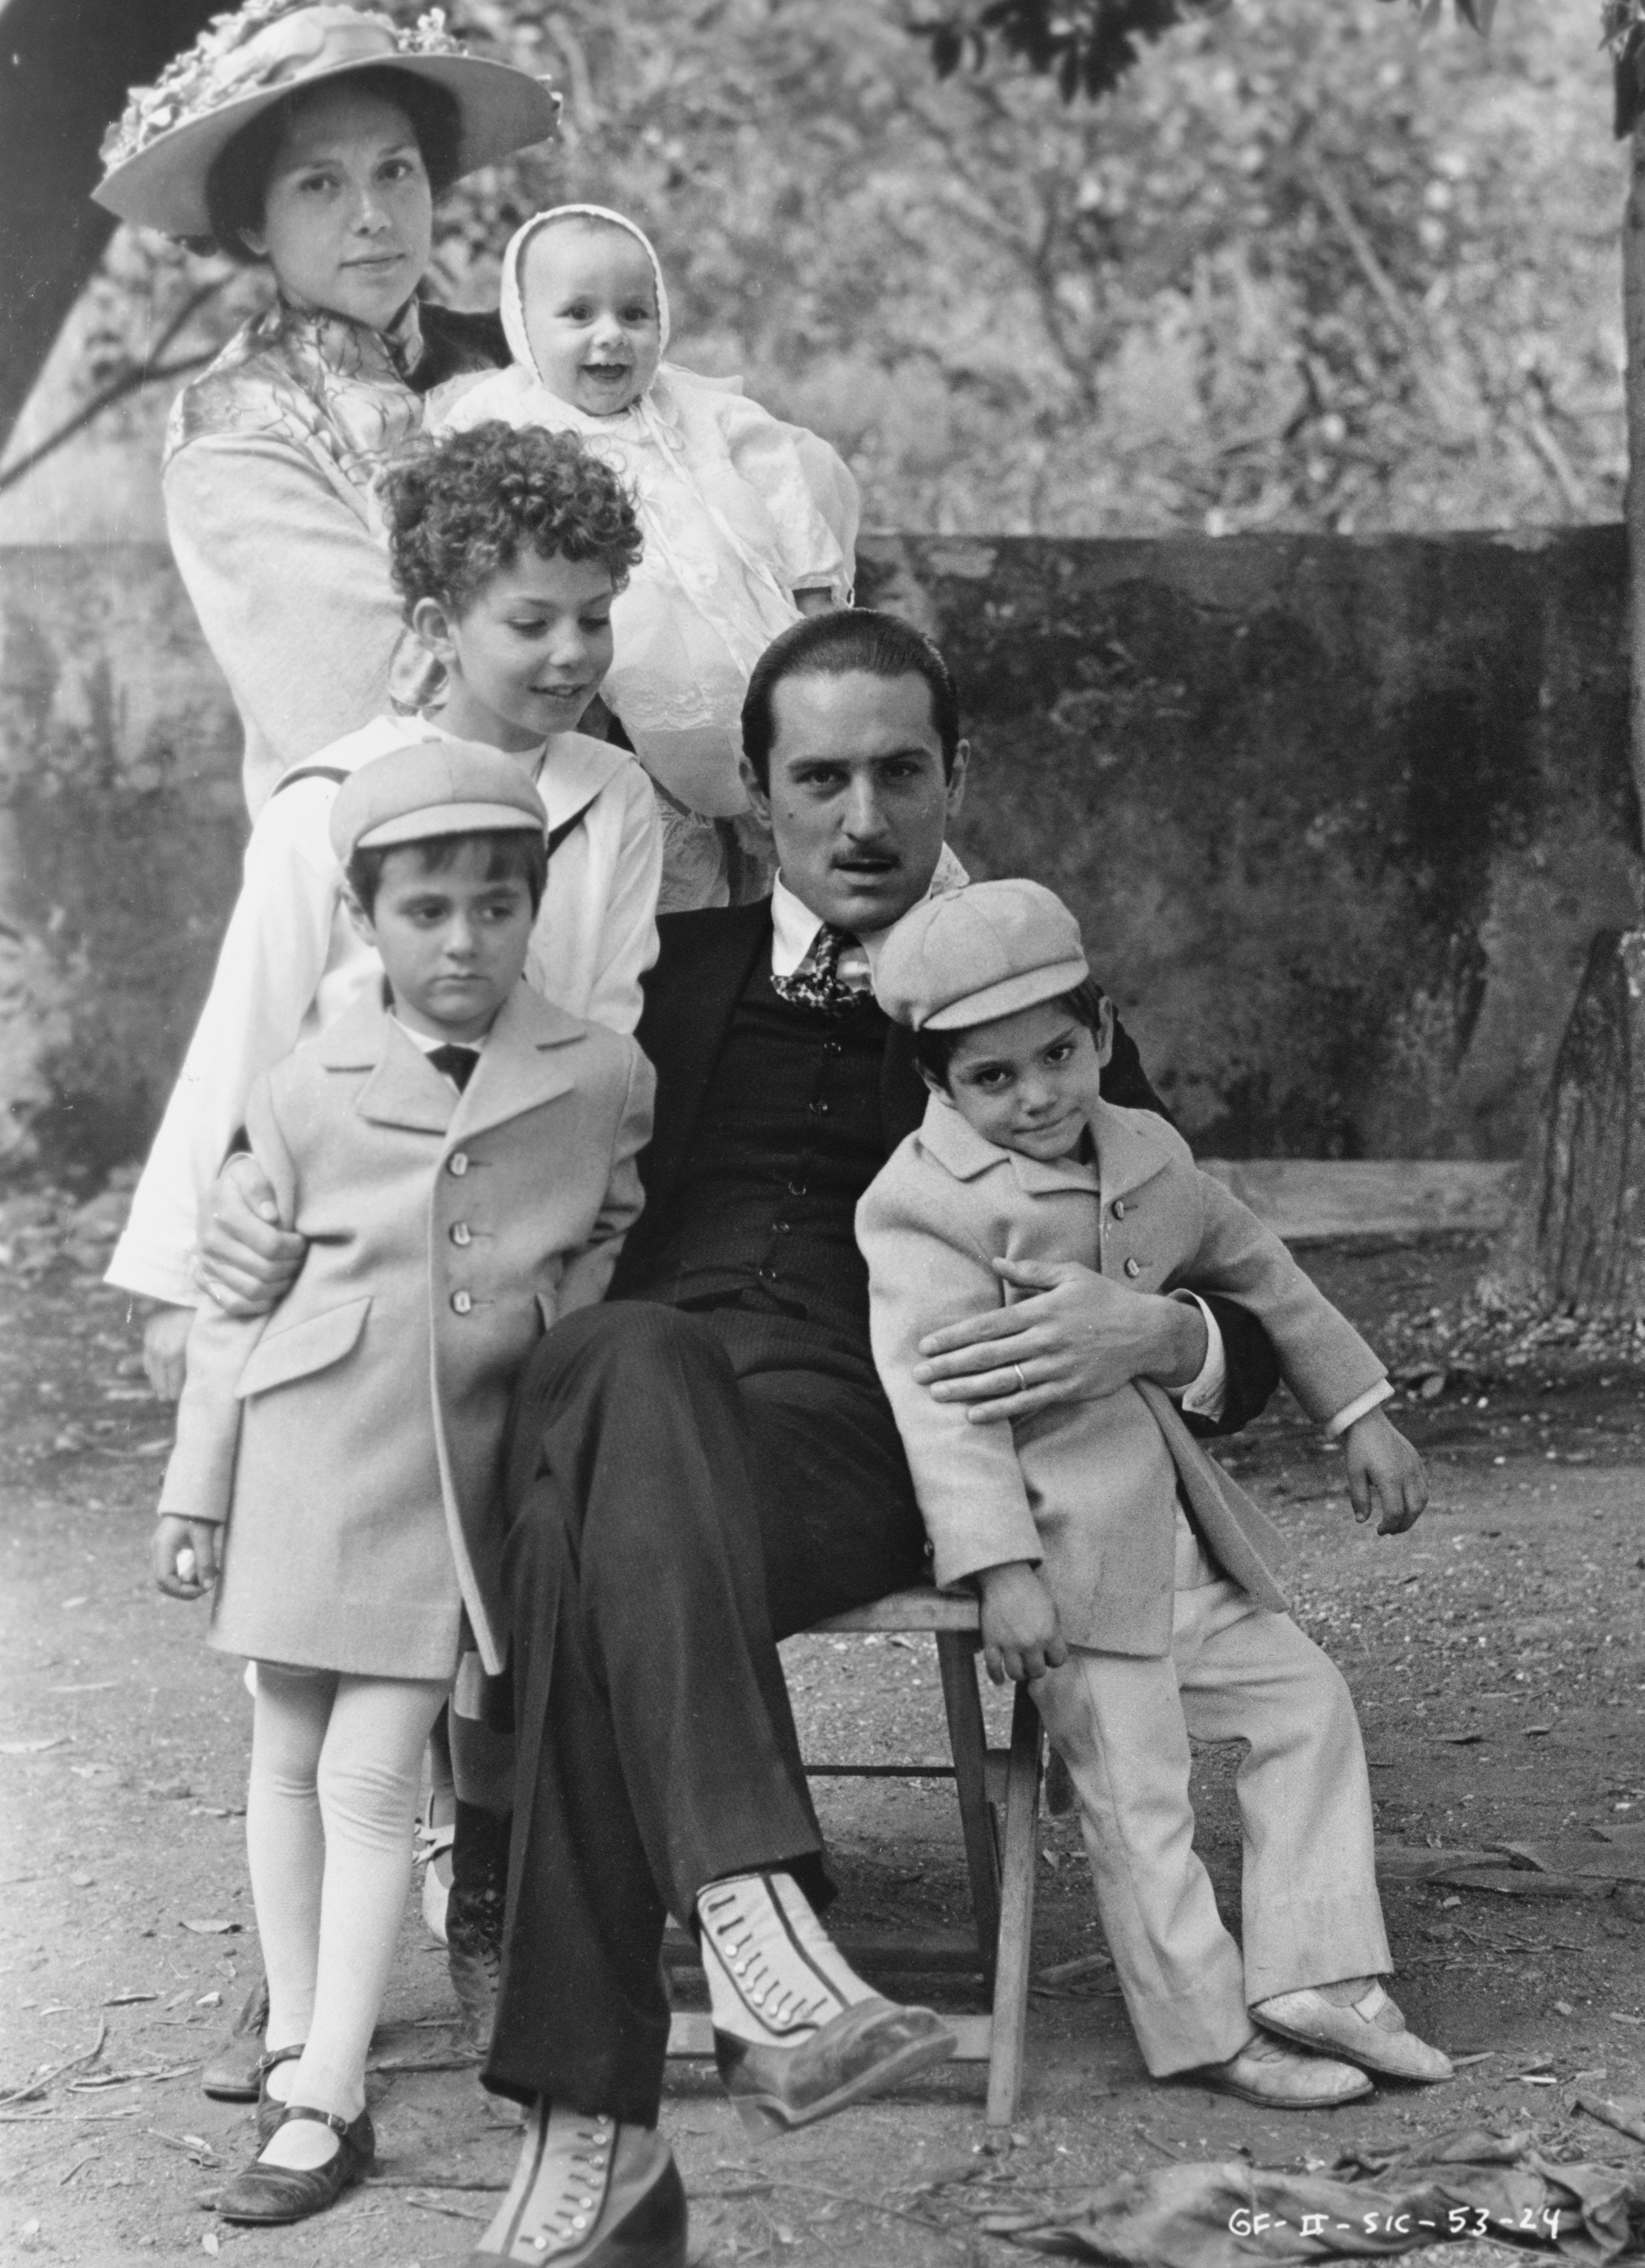 Robert De Niro as Vito Corleone as he poses with his wife Carmella, played by Francesca De Sapio, and their four children in "The Godfather: Part II" | Source: Getty Images